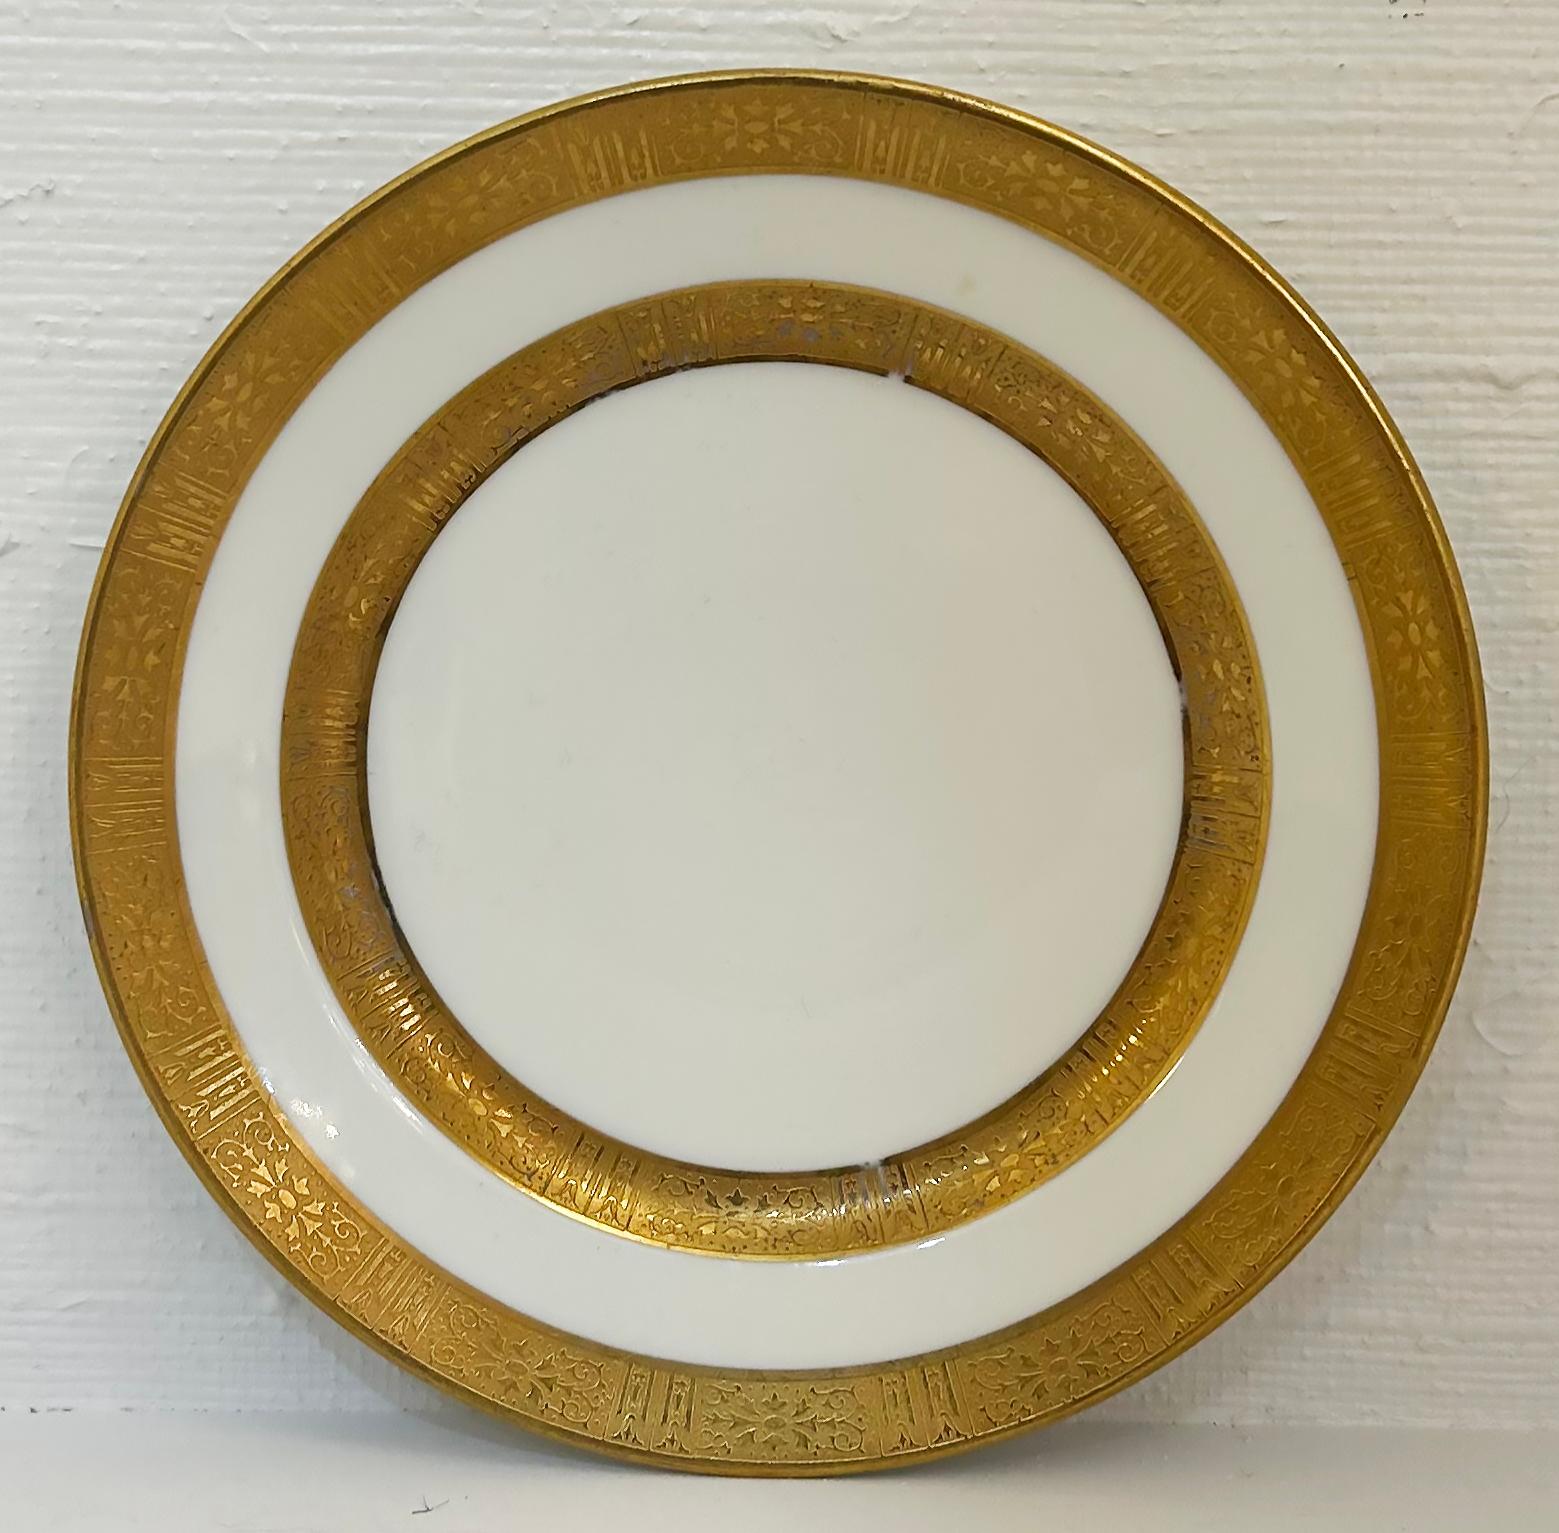 Limoges Gilt Banded Porcelain Plates Retailed by Stern Brothers NY Set of 8 In Good Condition For Sale In Miami, FL